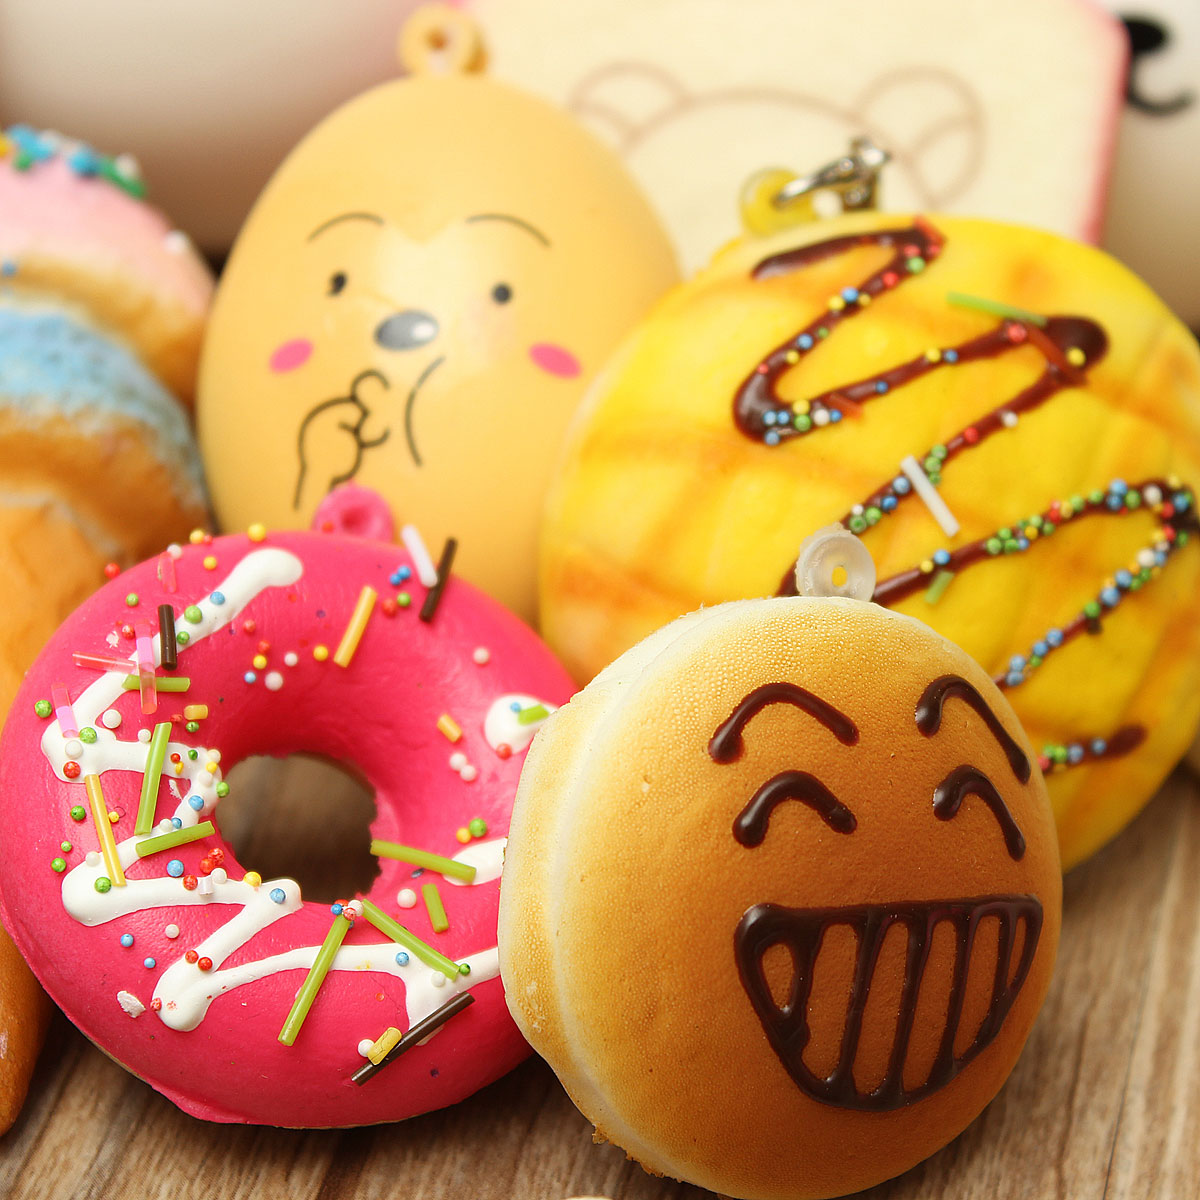 18PCS-Squishy-Christmas-Gift-Decor-Panda-Cup-Cake-Toasts-Buns-Donuts-Random-Soft-Cell-Phone-Straps-1069615-4